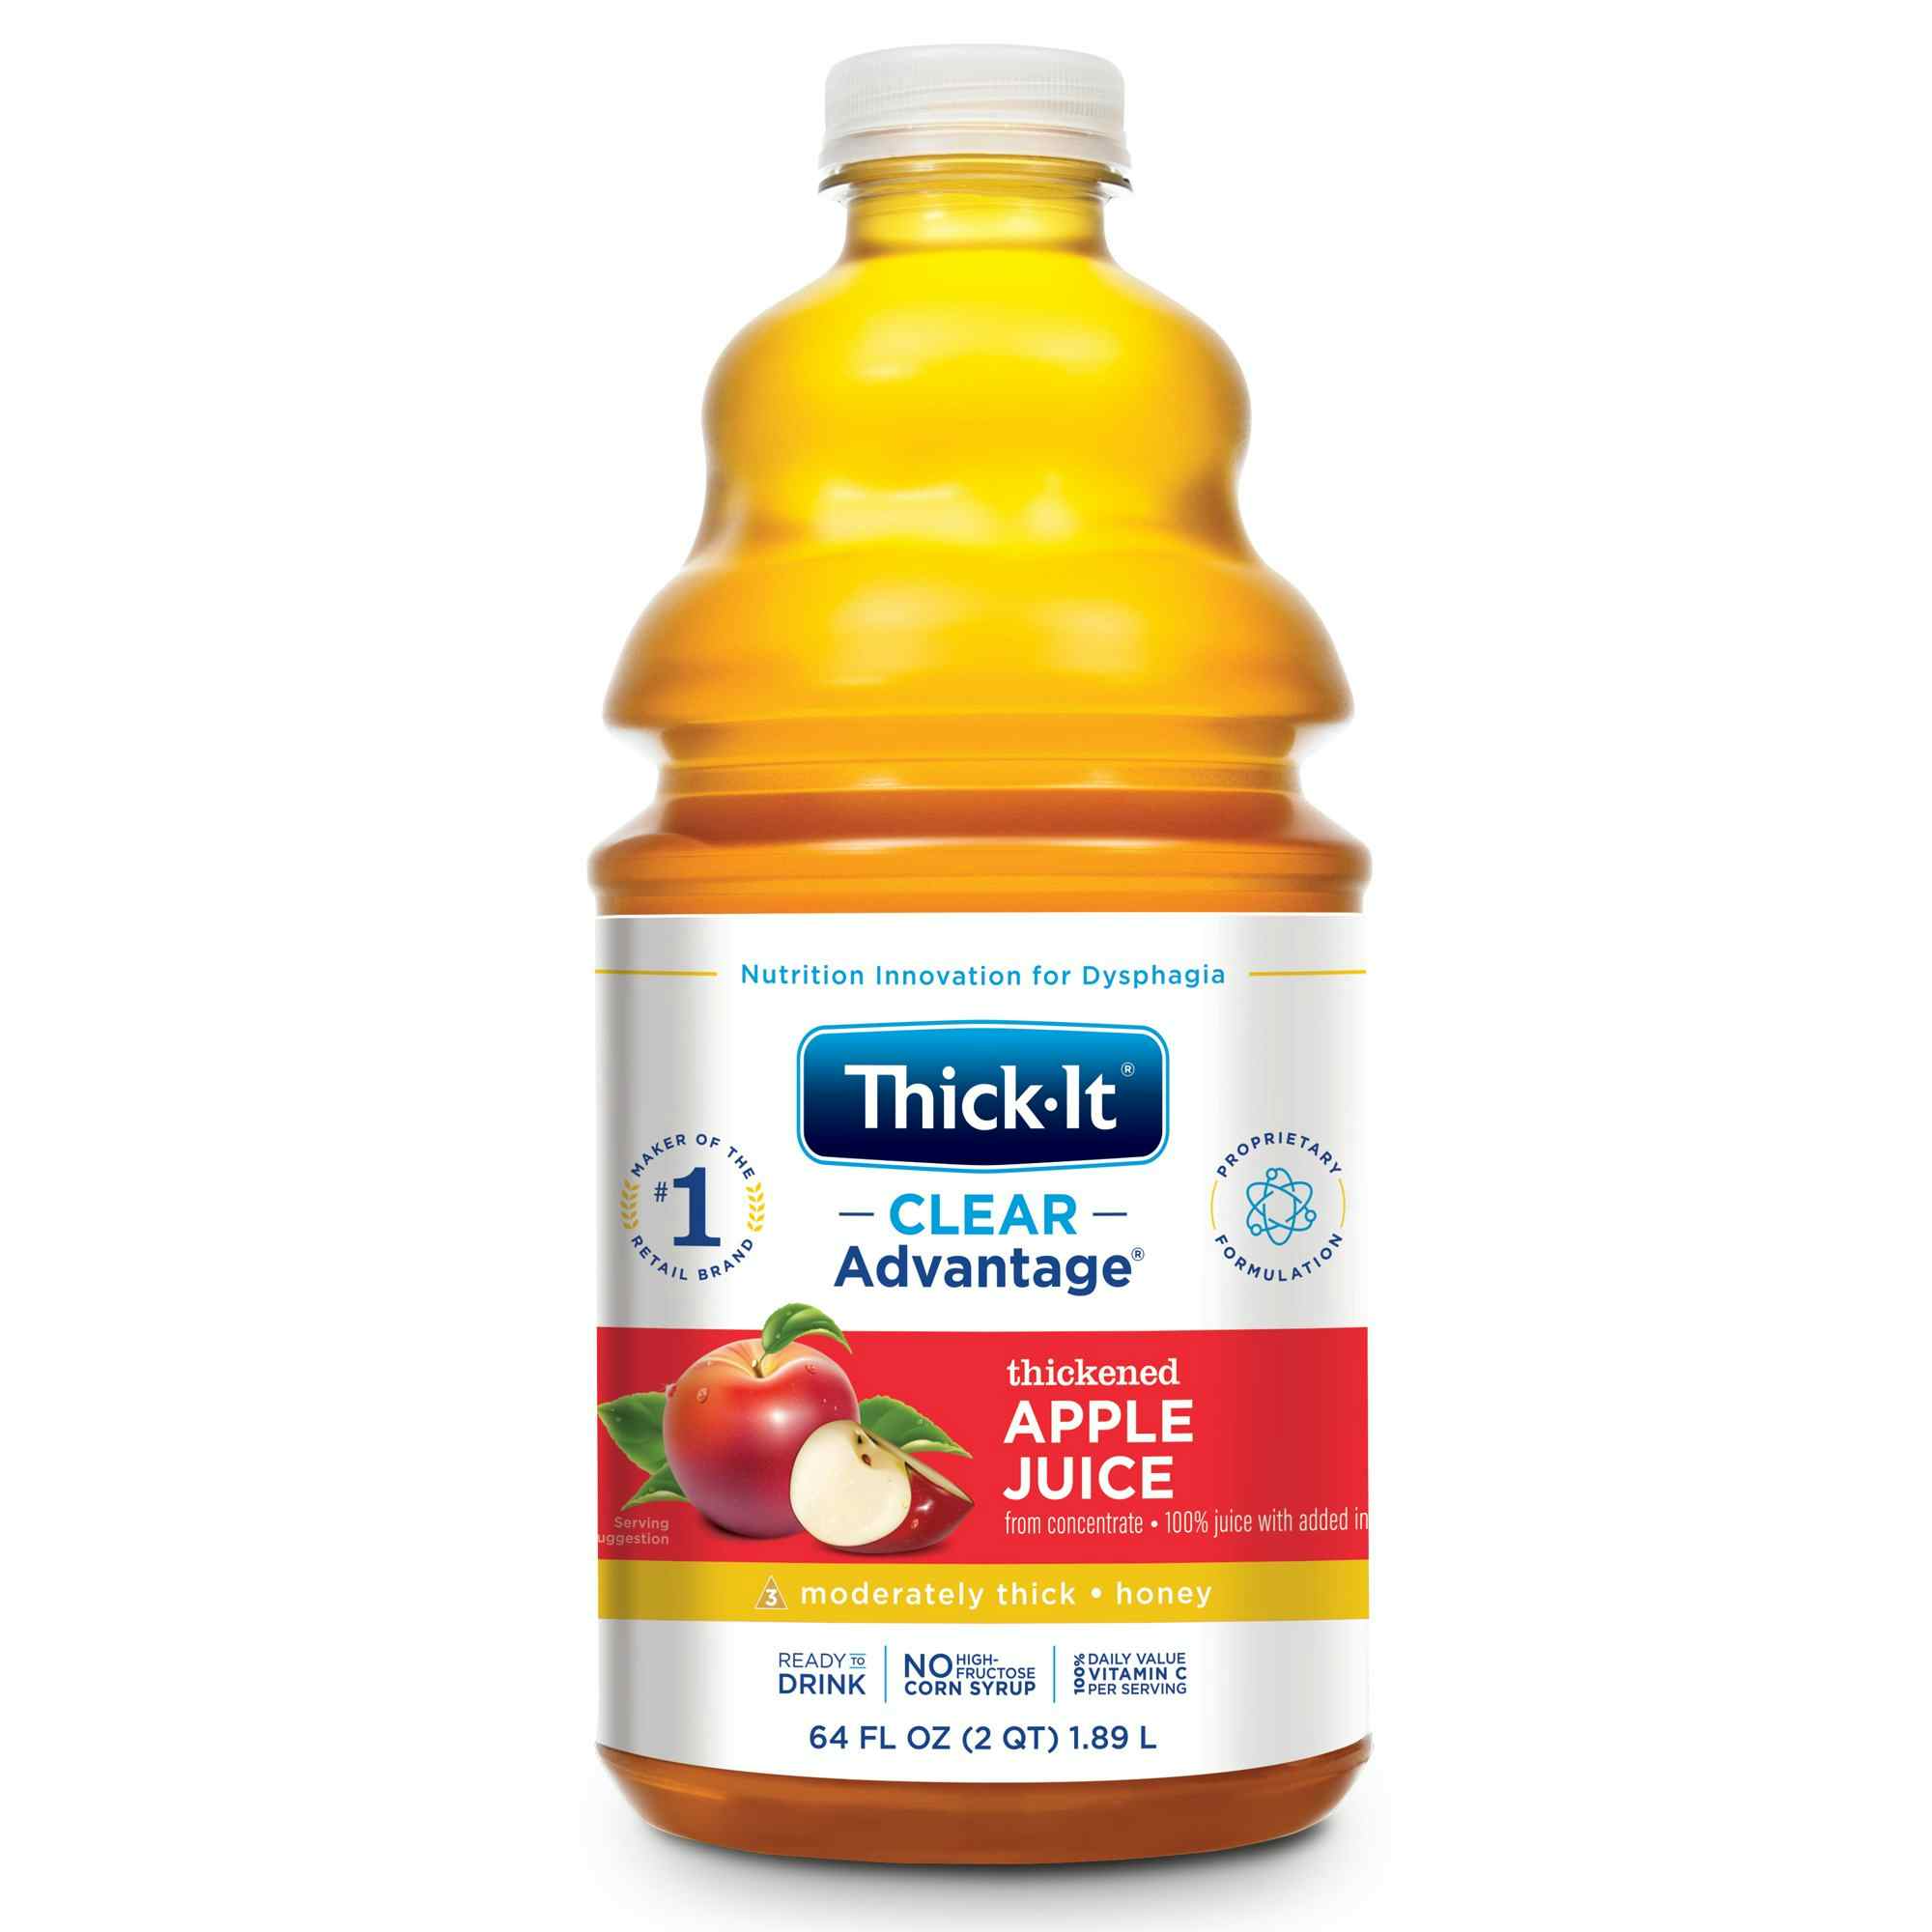 Thick-It Clear Advantage Thickened Apple Juice, Honey Consistency, 64 oz., B456-A5044, Case of 4